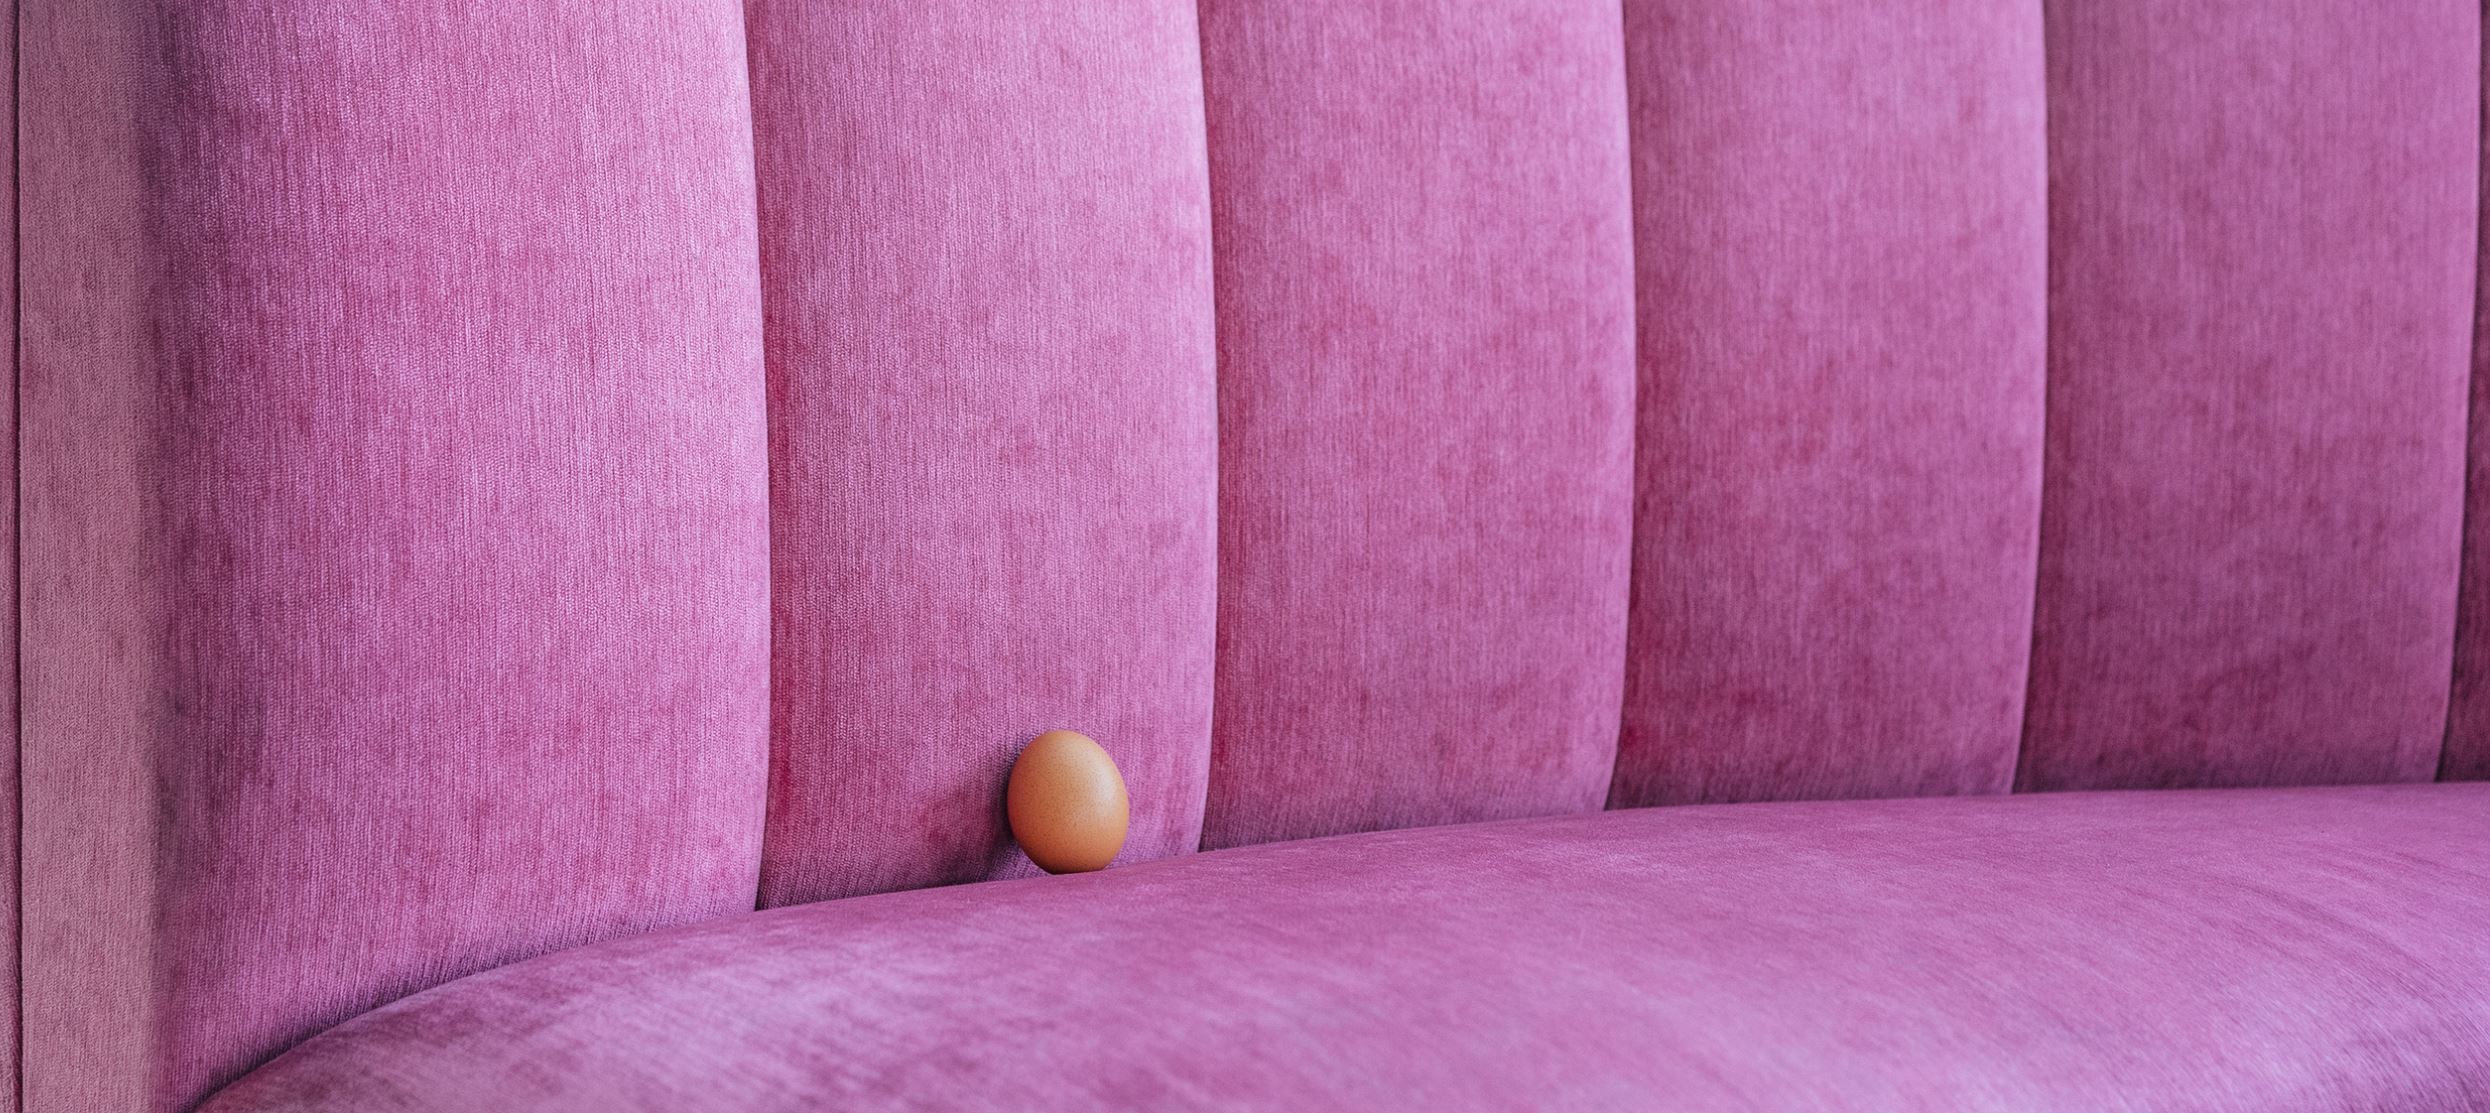 Eugene the Egg at the SIXTY LES Hotel in New York City. Photos: Hypebeast